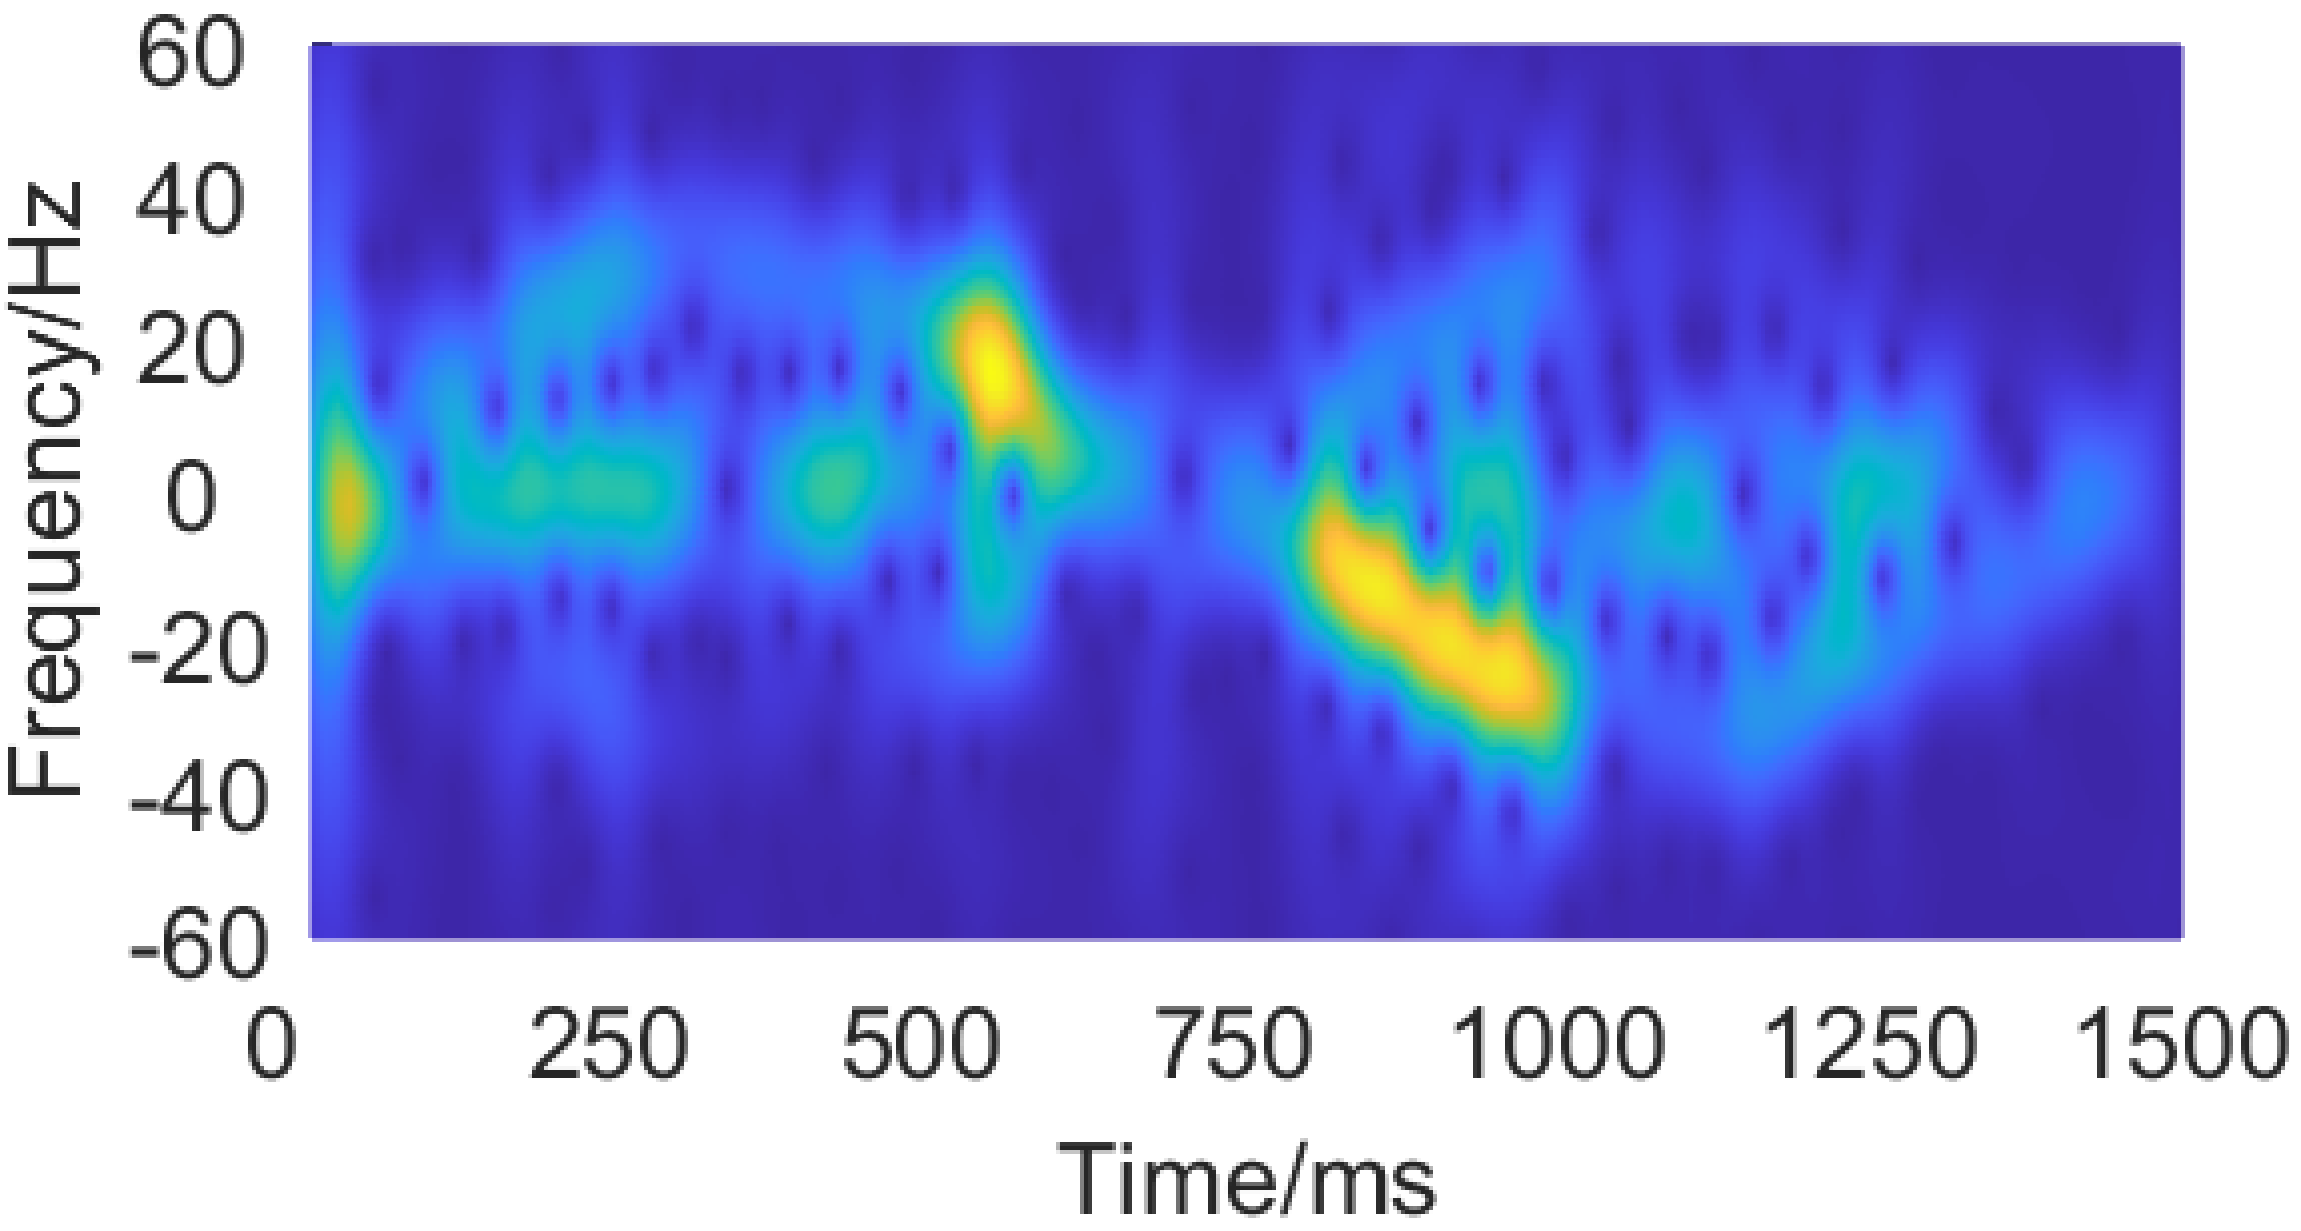 The measured spectrogram of a pushing and pulling gesture.